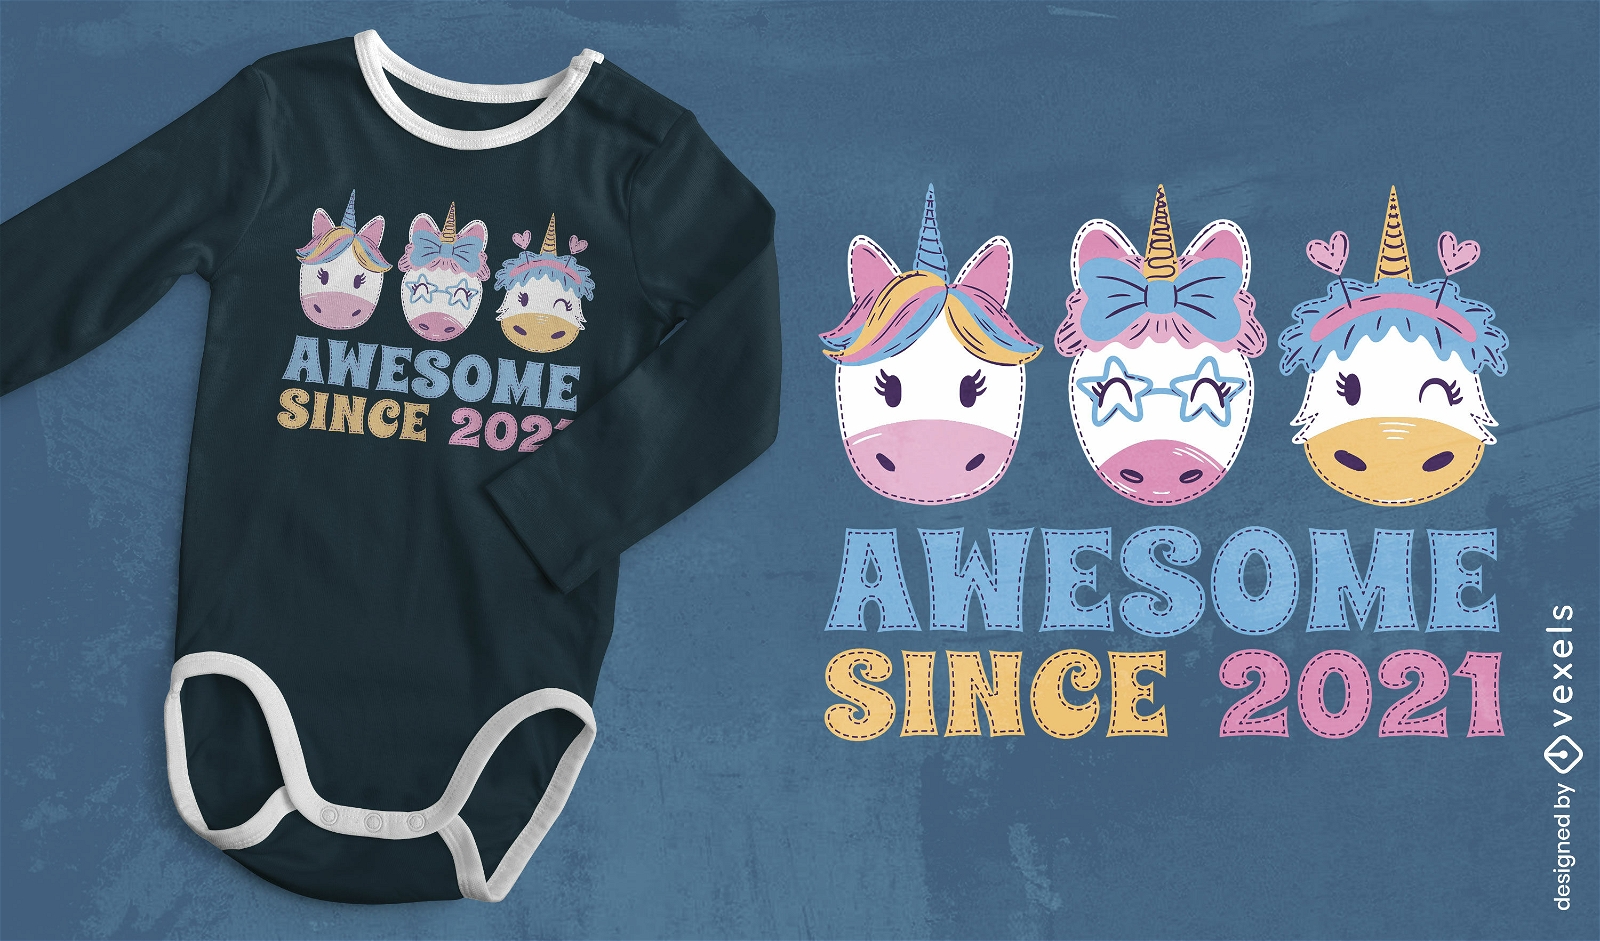 Awesome since birth t-shirt design